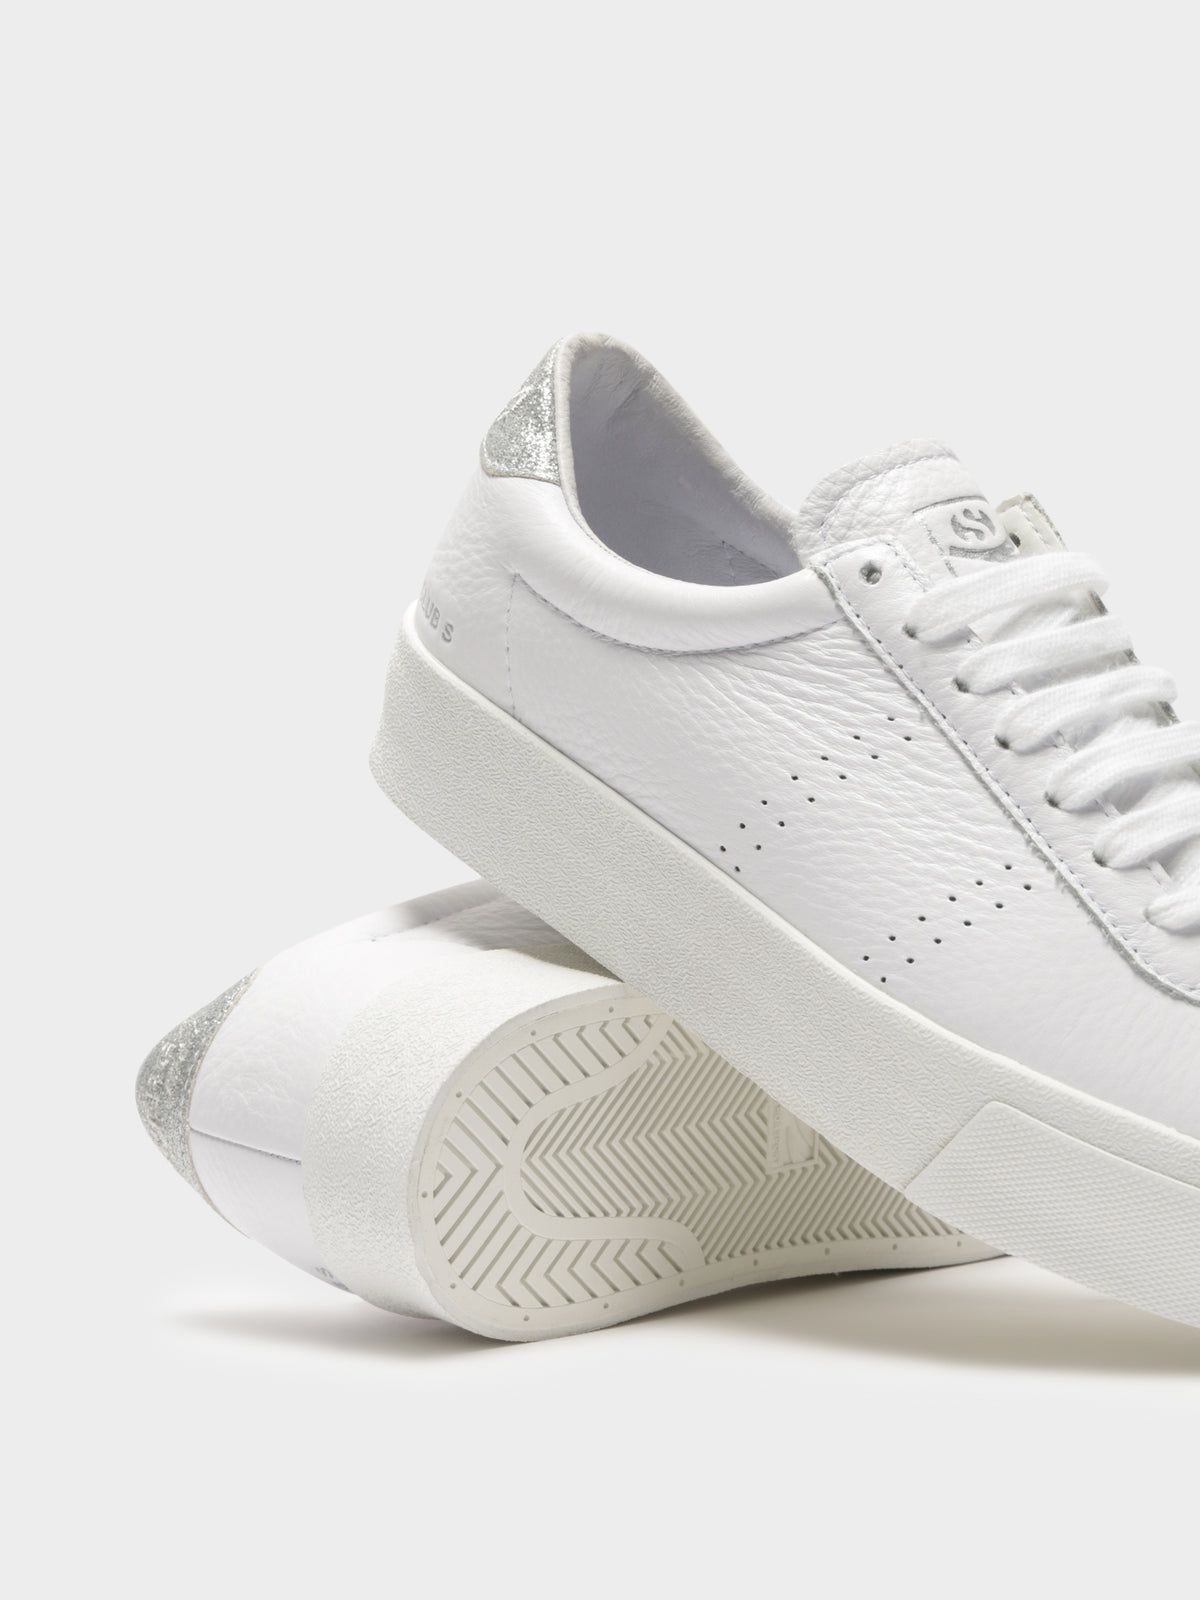 Womens 2854 Club 3 Comfleau Sneakers in White &amp; Grey Silver